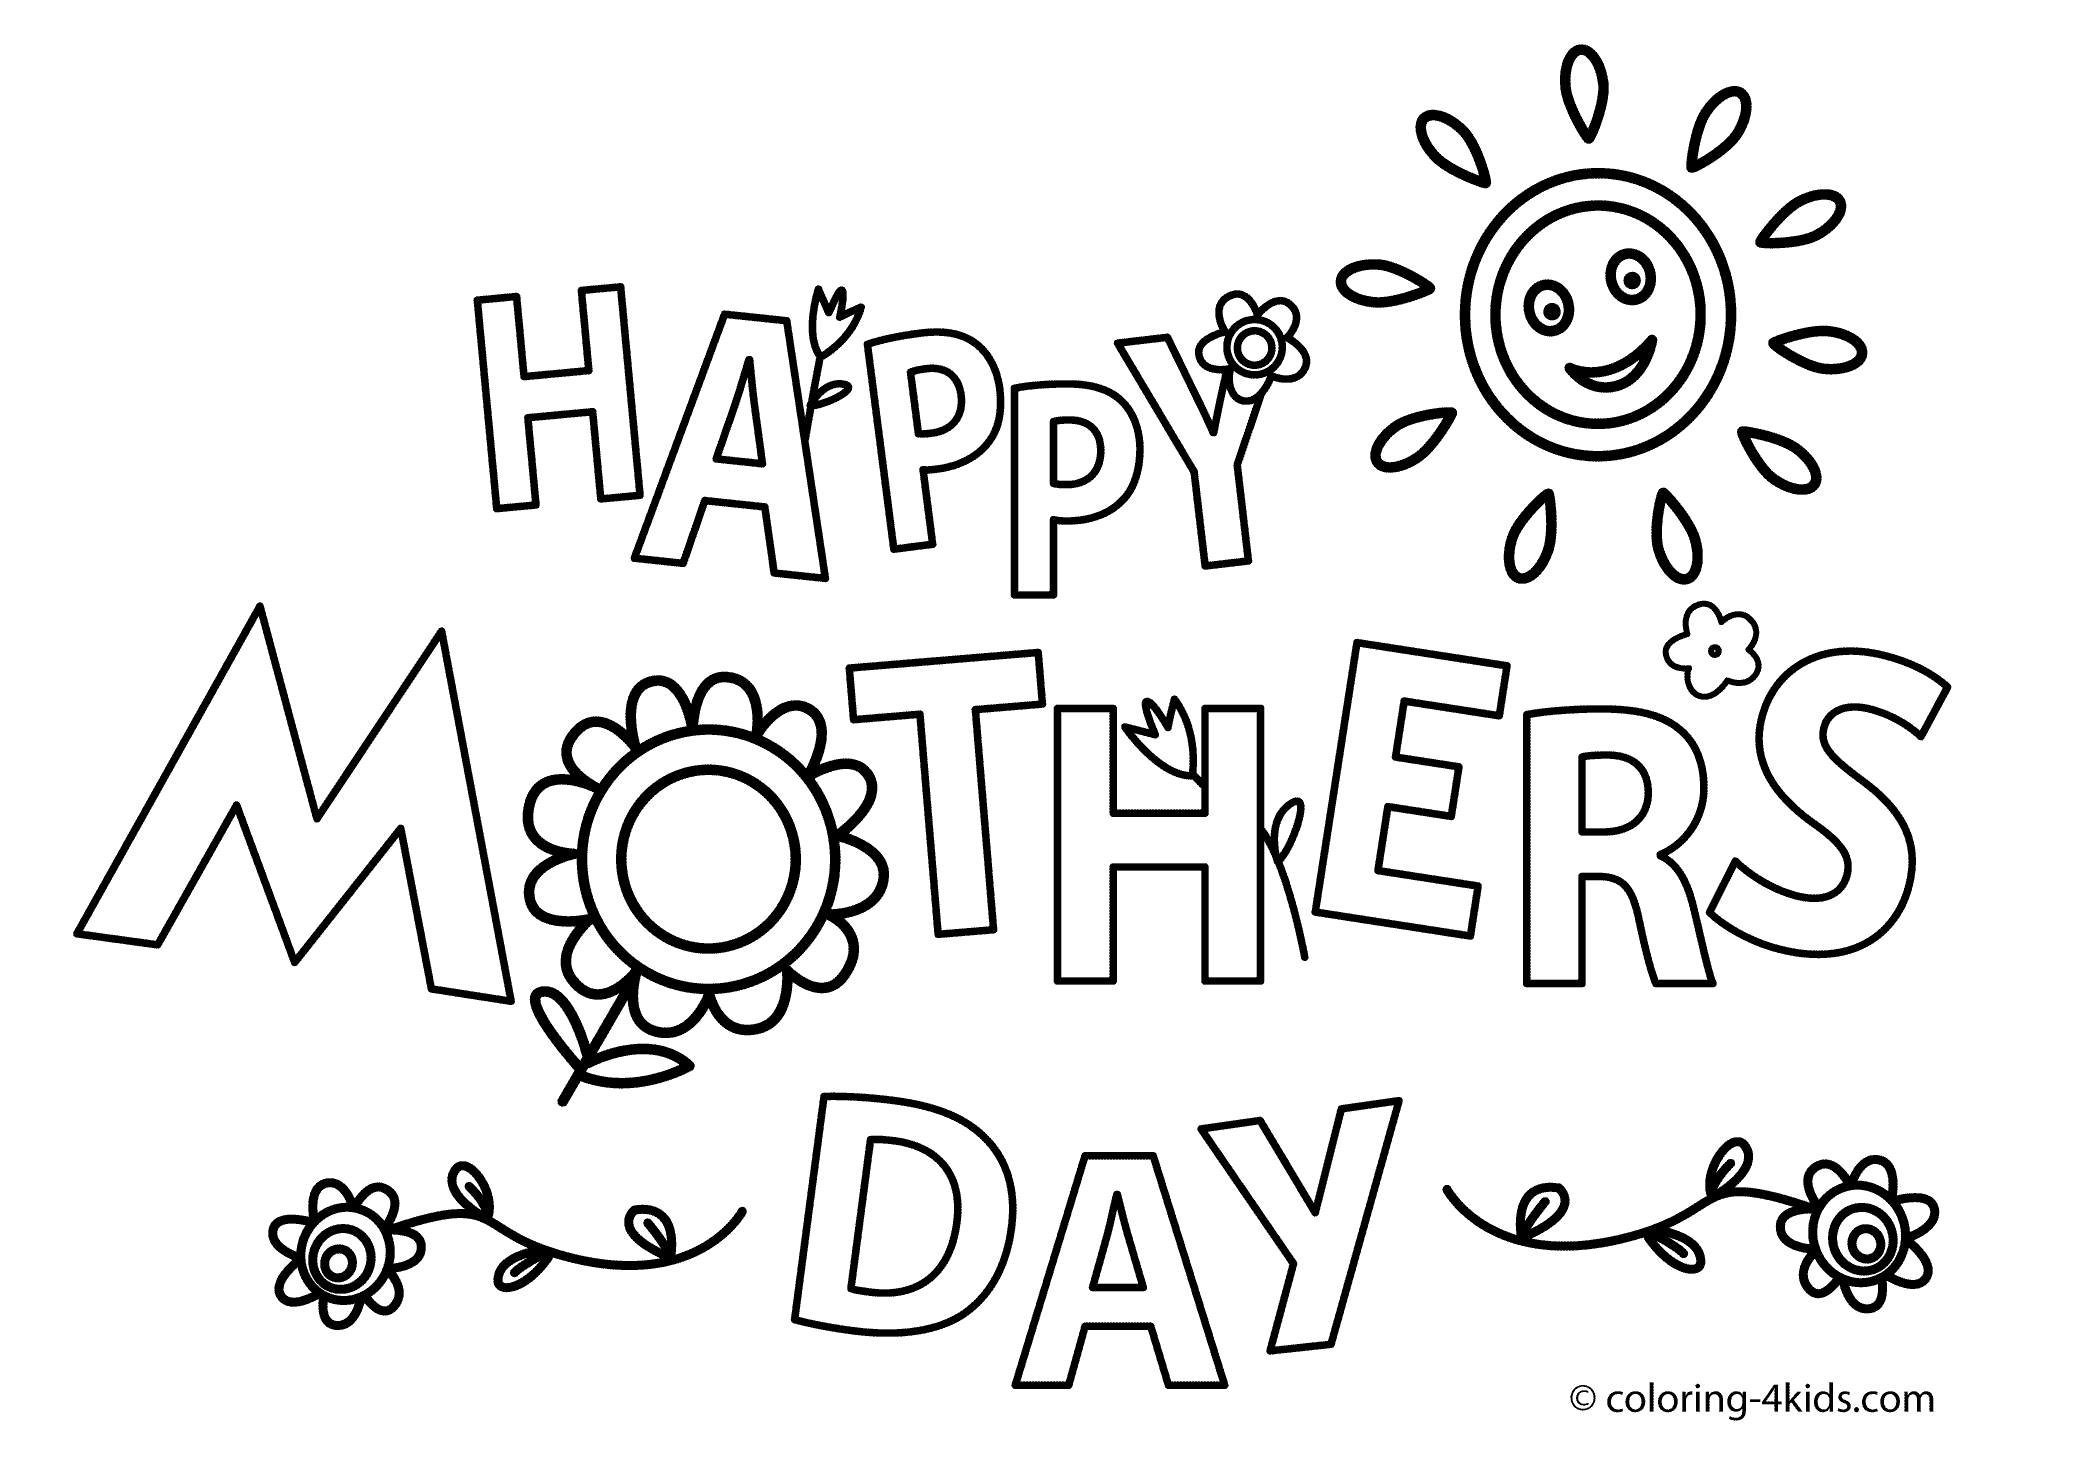 Happy mothers day coloring pages for kids printable free mothers day coloring pages mothers day colors mothers day coloring sheets